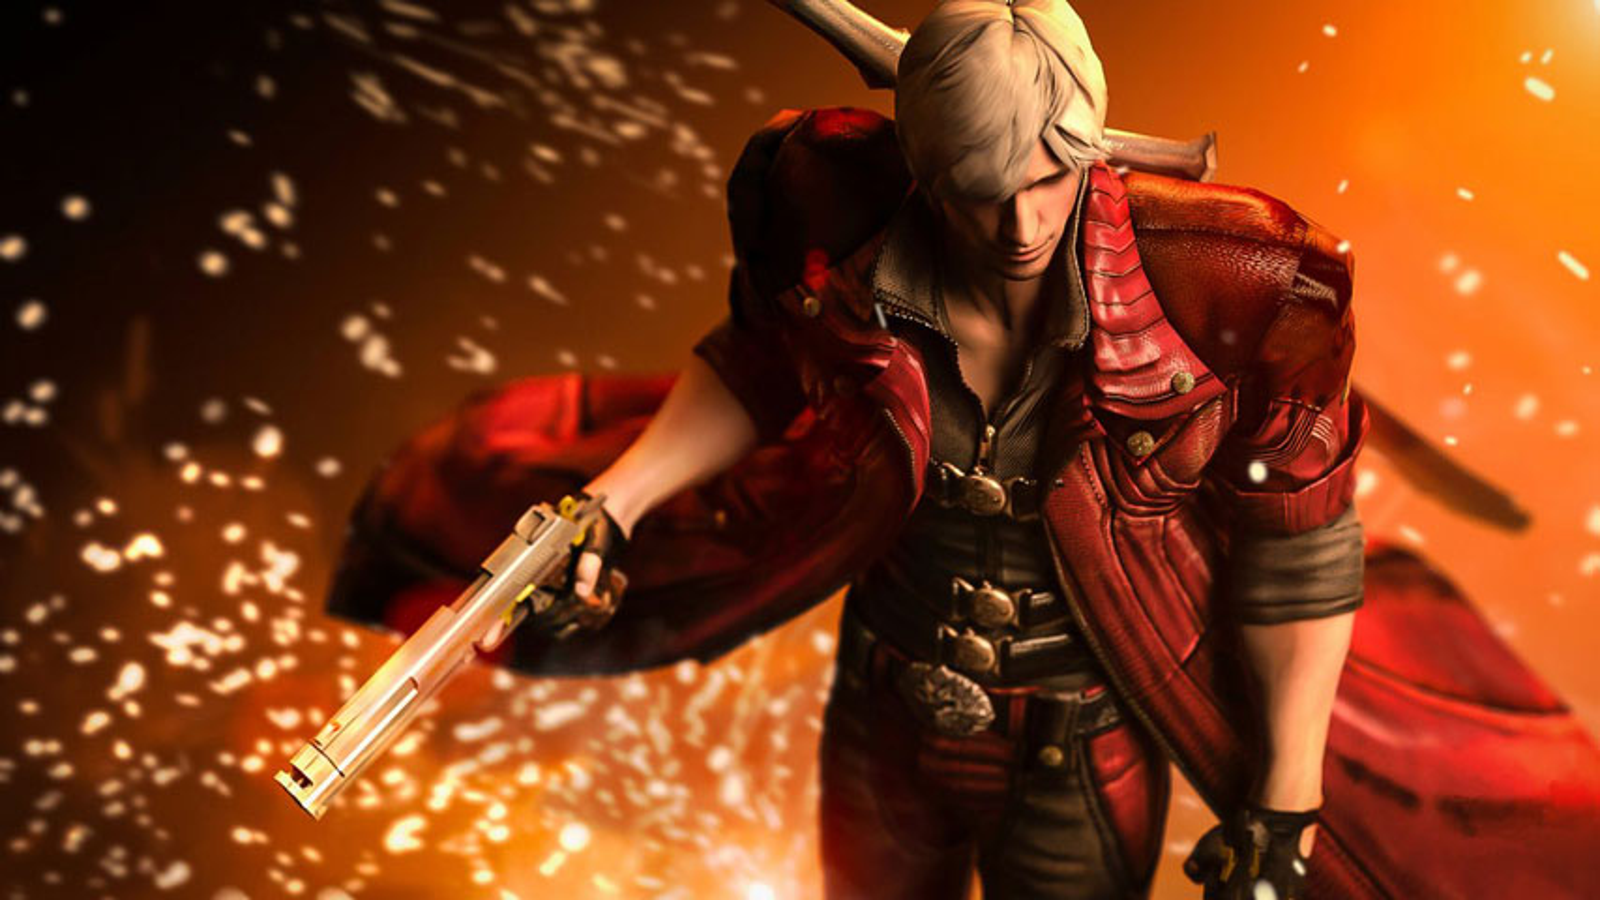 100+] Devil May Cry Wallpapers